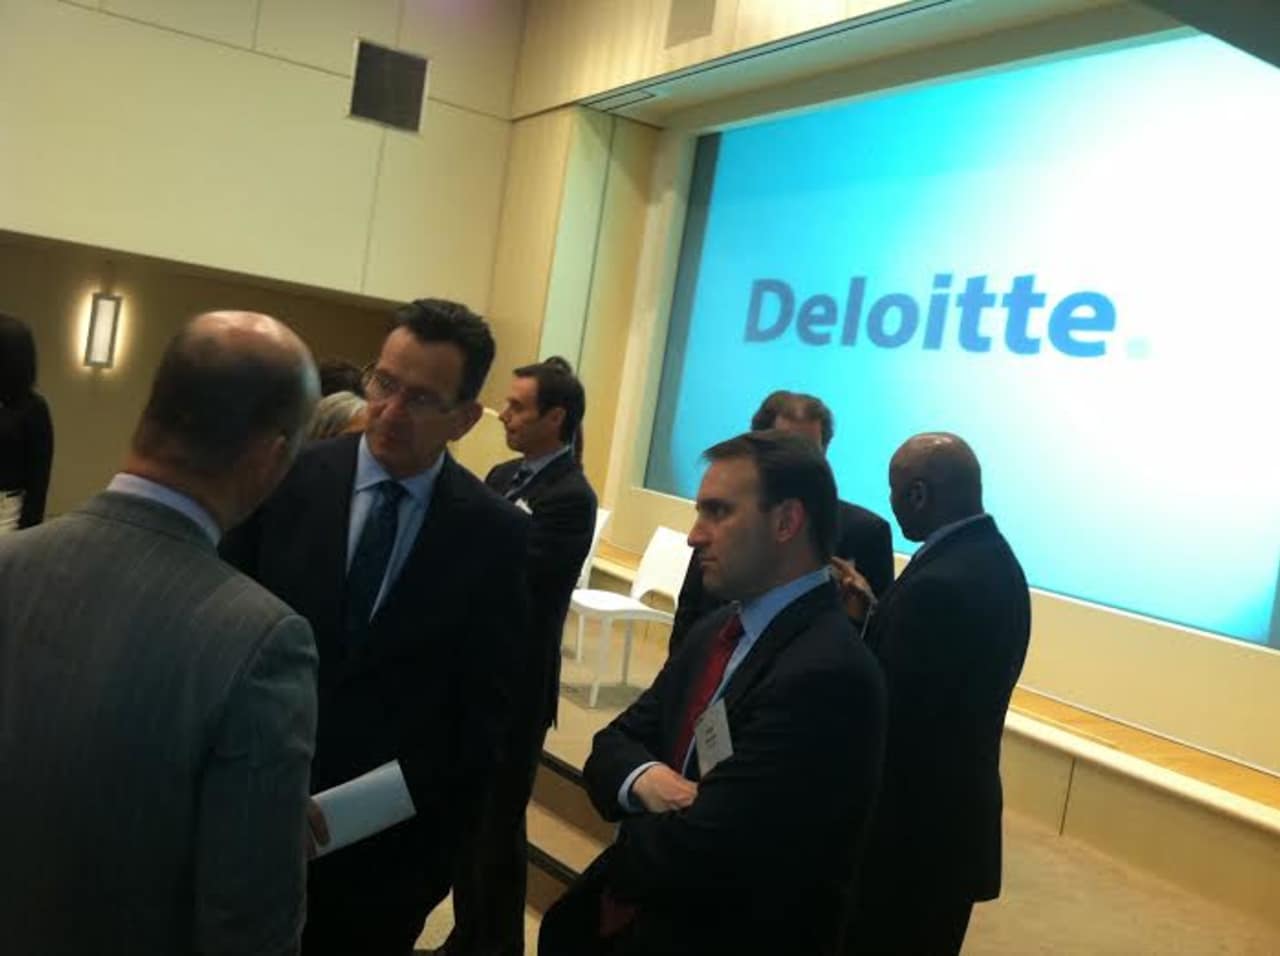 Gov. Dannel Malloy speaks with Deloitte Managing Partner Steve Gallucci, at left, and Director Peter Brown, at right, during grand opening of Deloitte's new Stamford headquarters Tuesday.